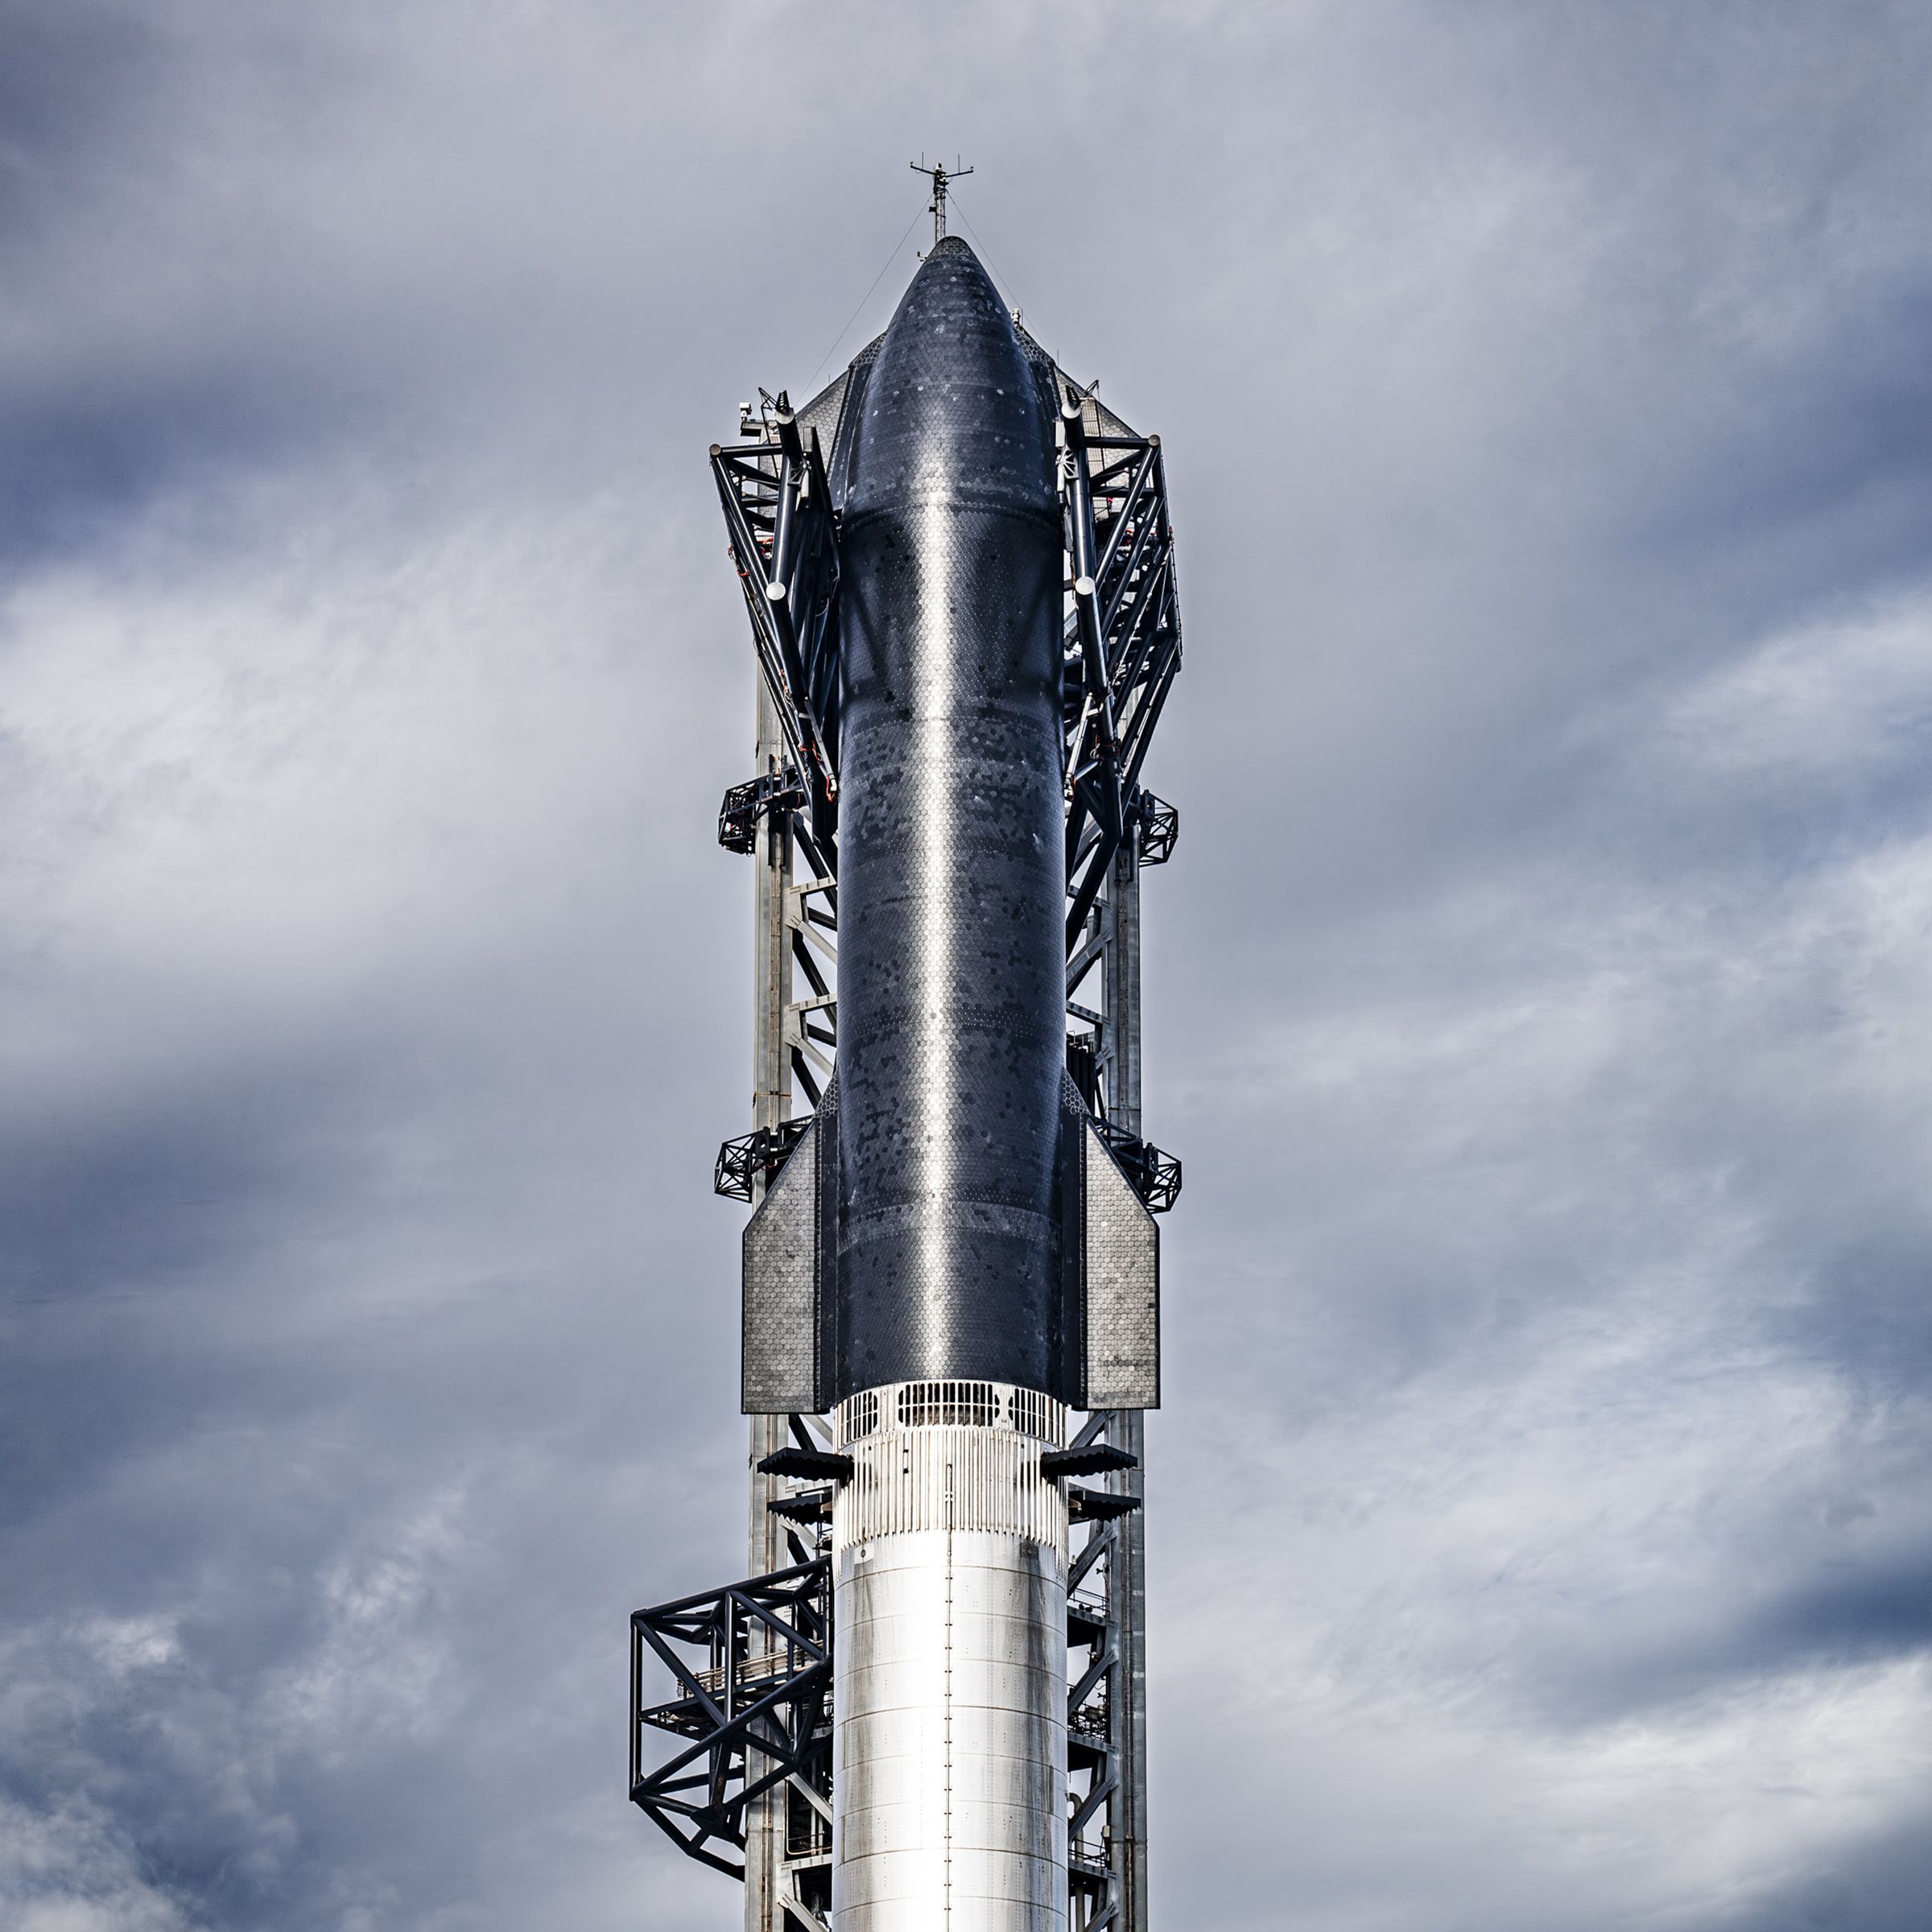 Image of the Starship prototype in position for a launch attempt against a background of a cloudy blue sky.